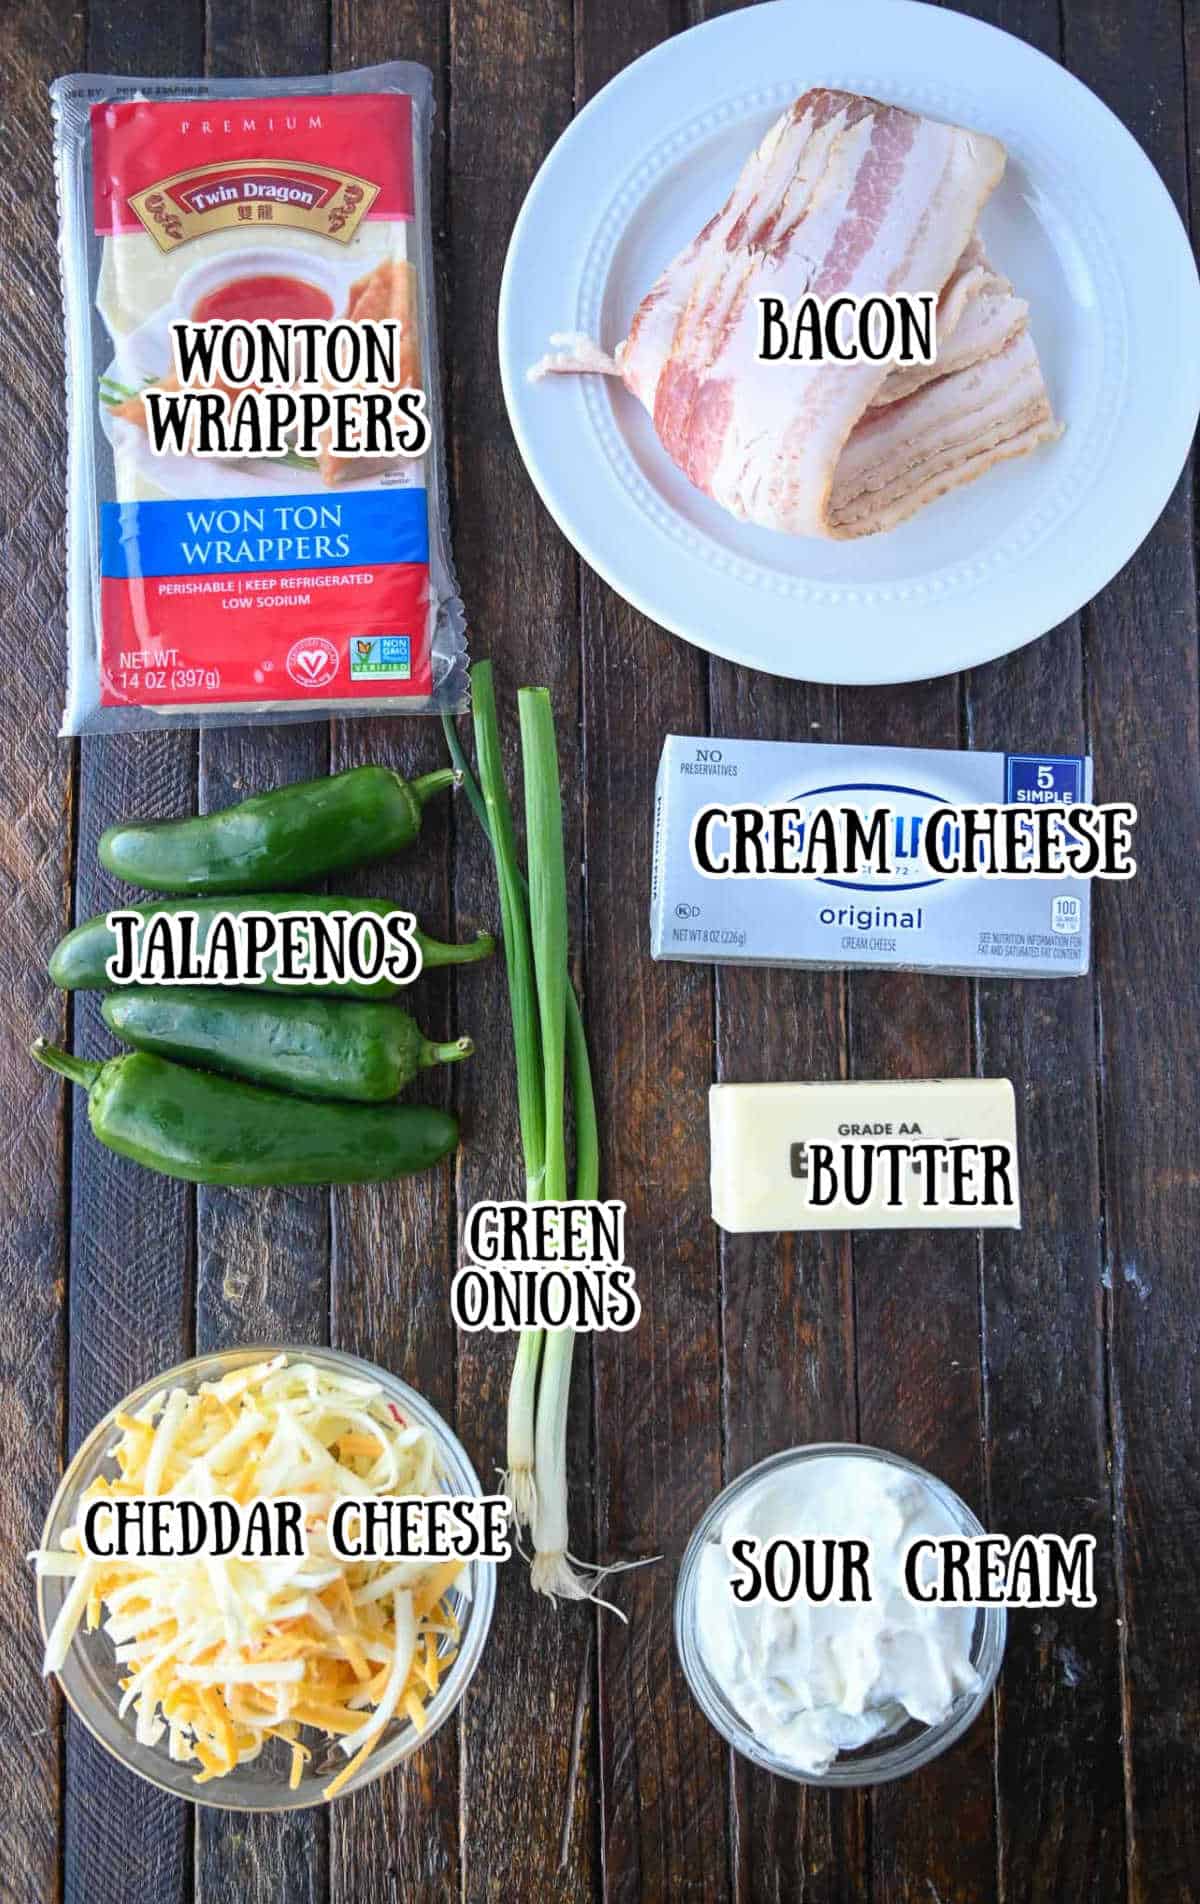 All the ingredients needed to make this recipe.